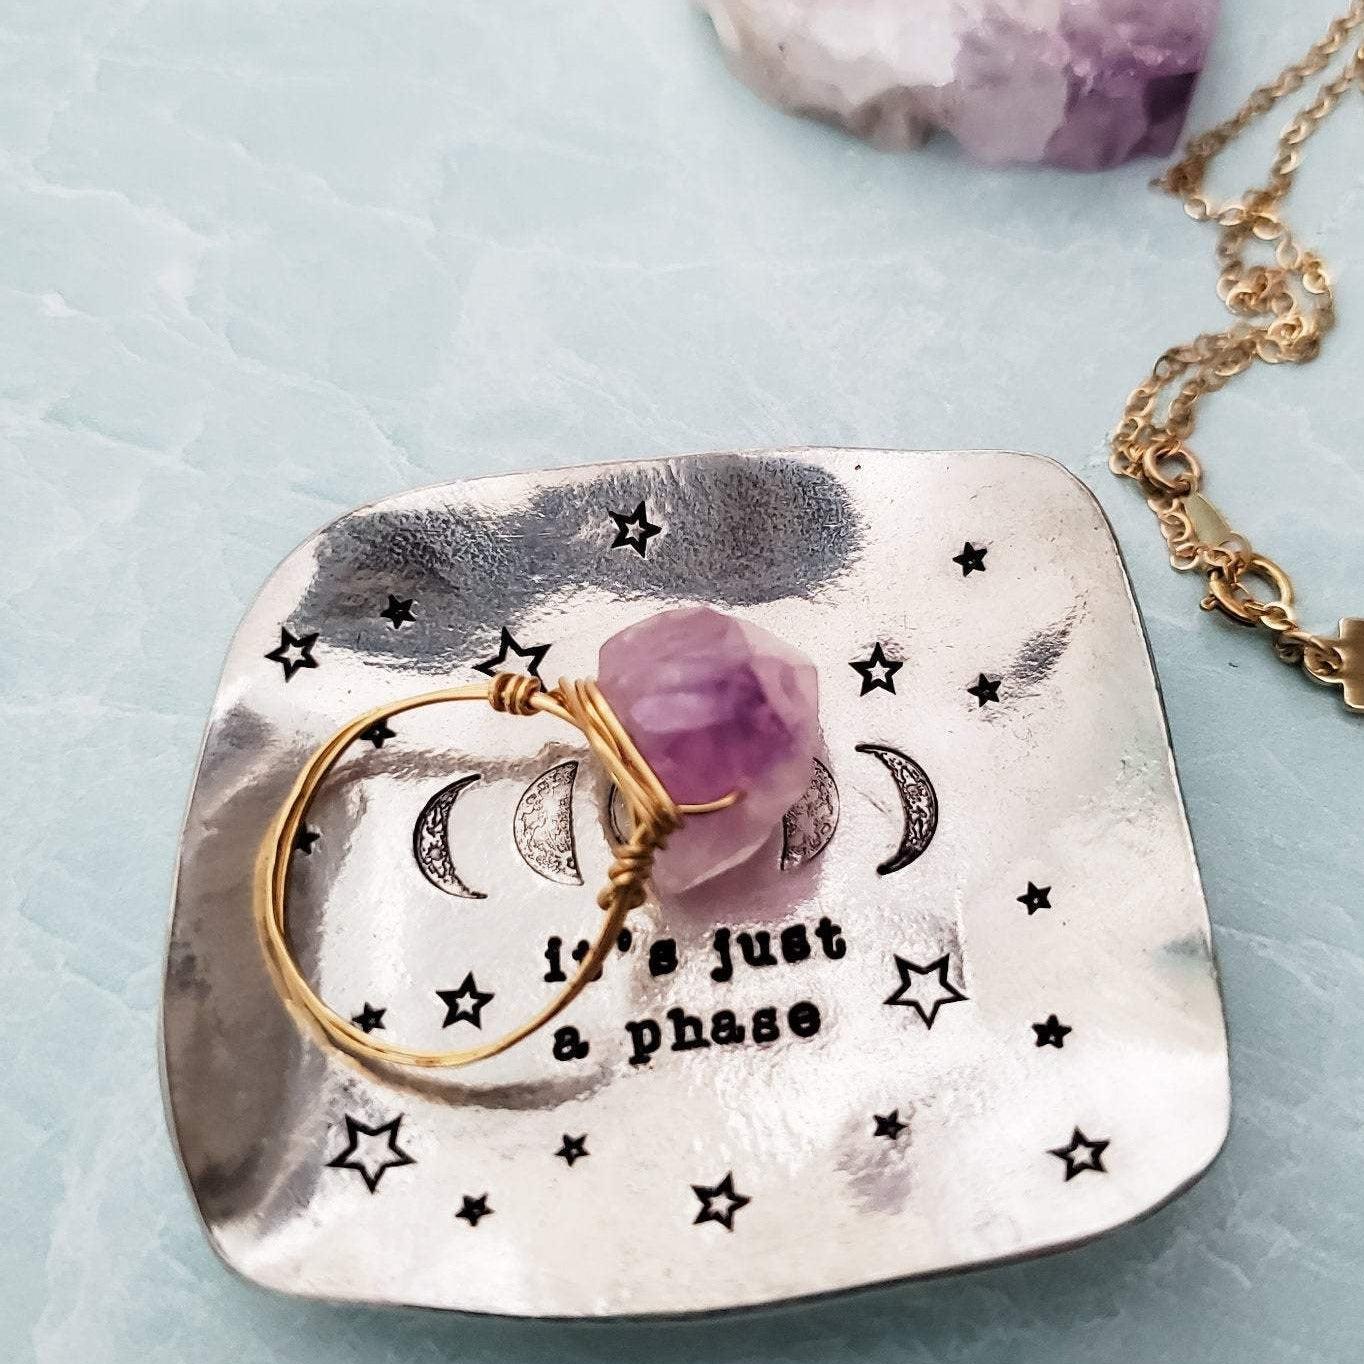 It's Just A Phase Moon Phases Trinket Dish Salt and Sparkle